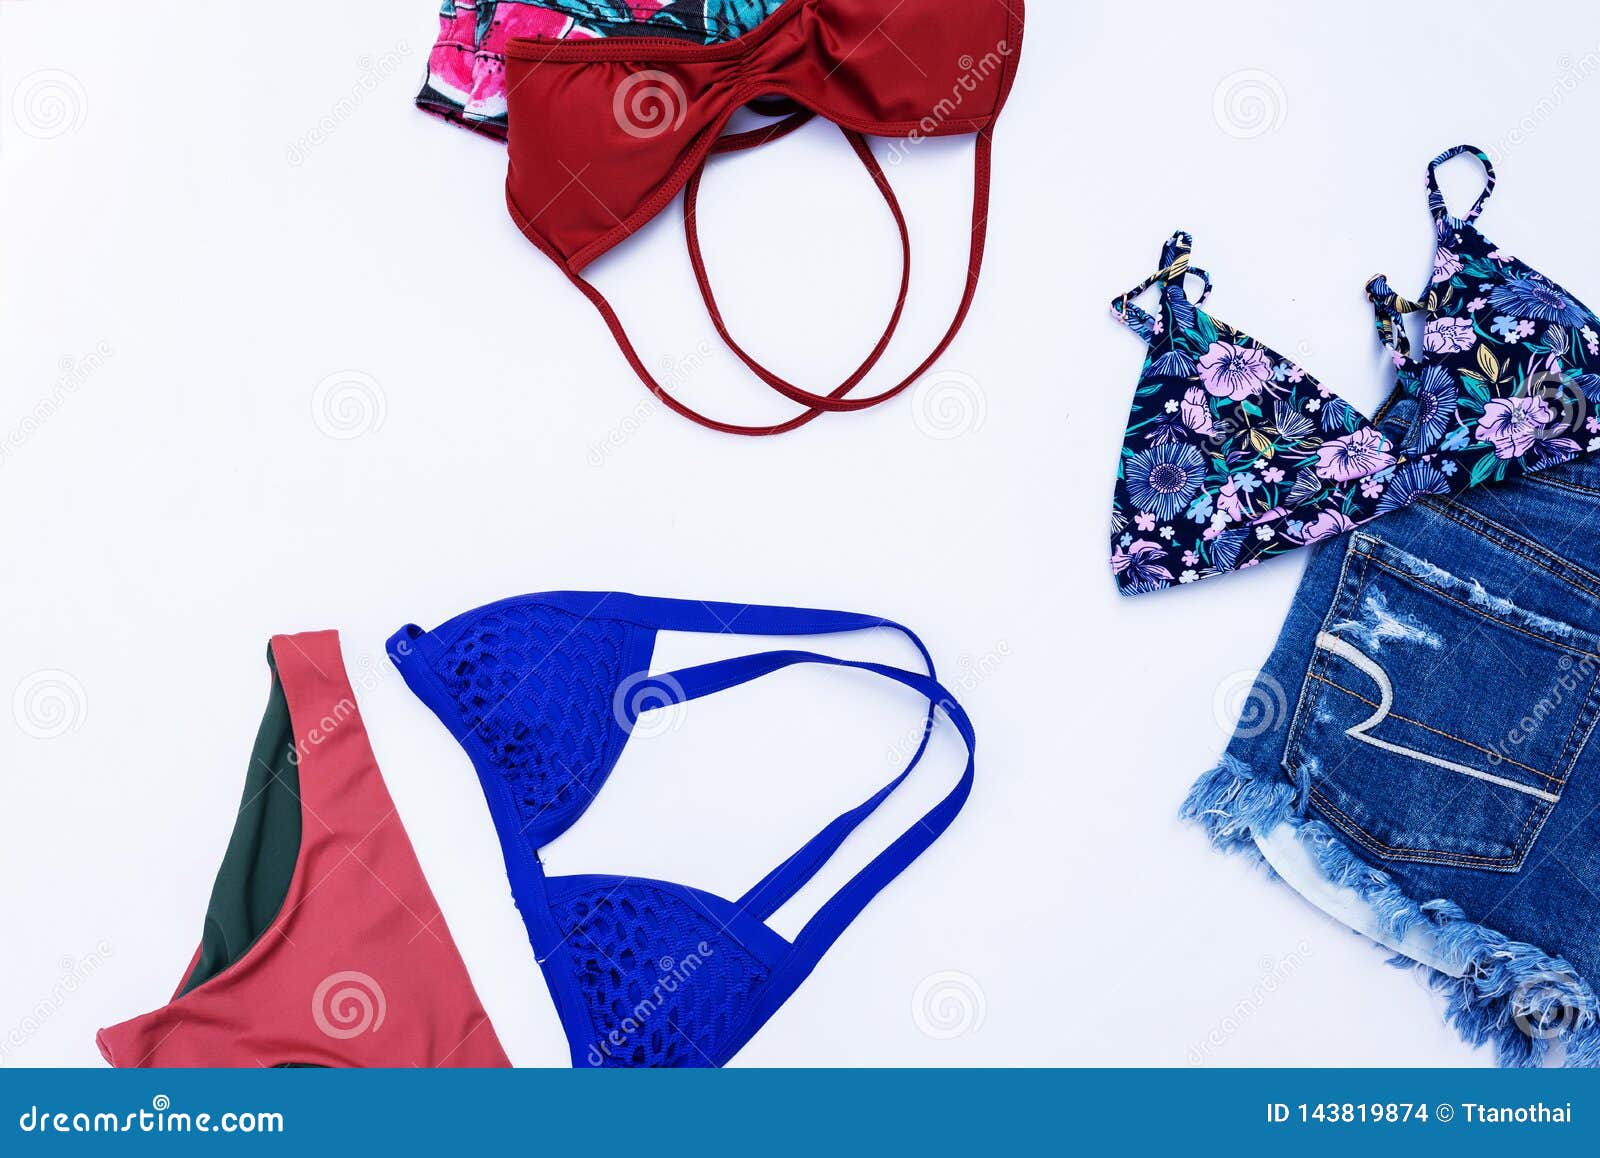 Summer Bikini Swimsuit Clothes and Accessories Concept Stock Photo ...